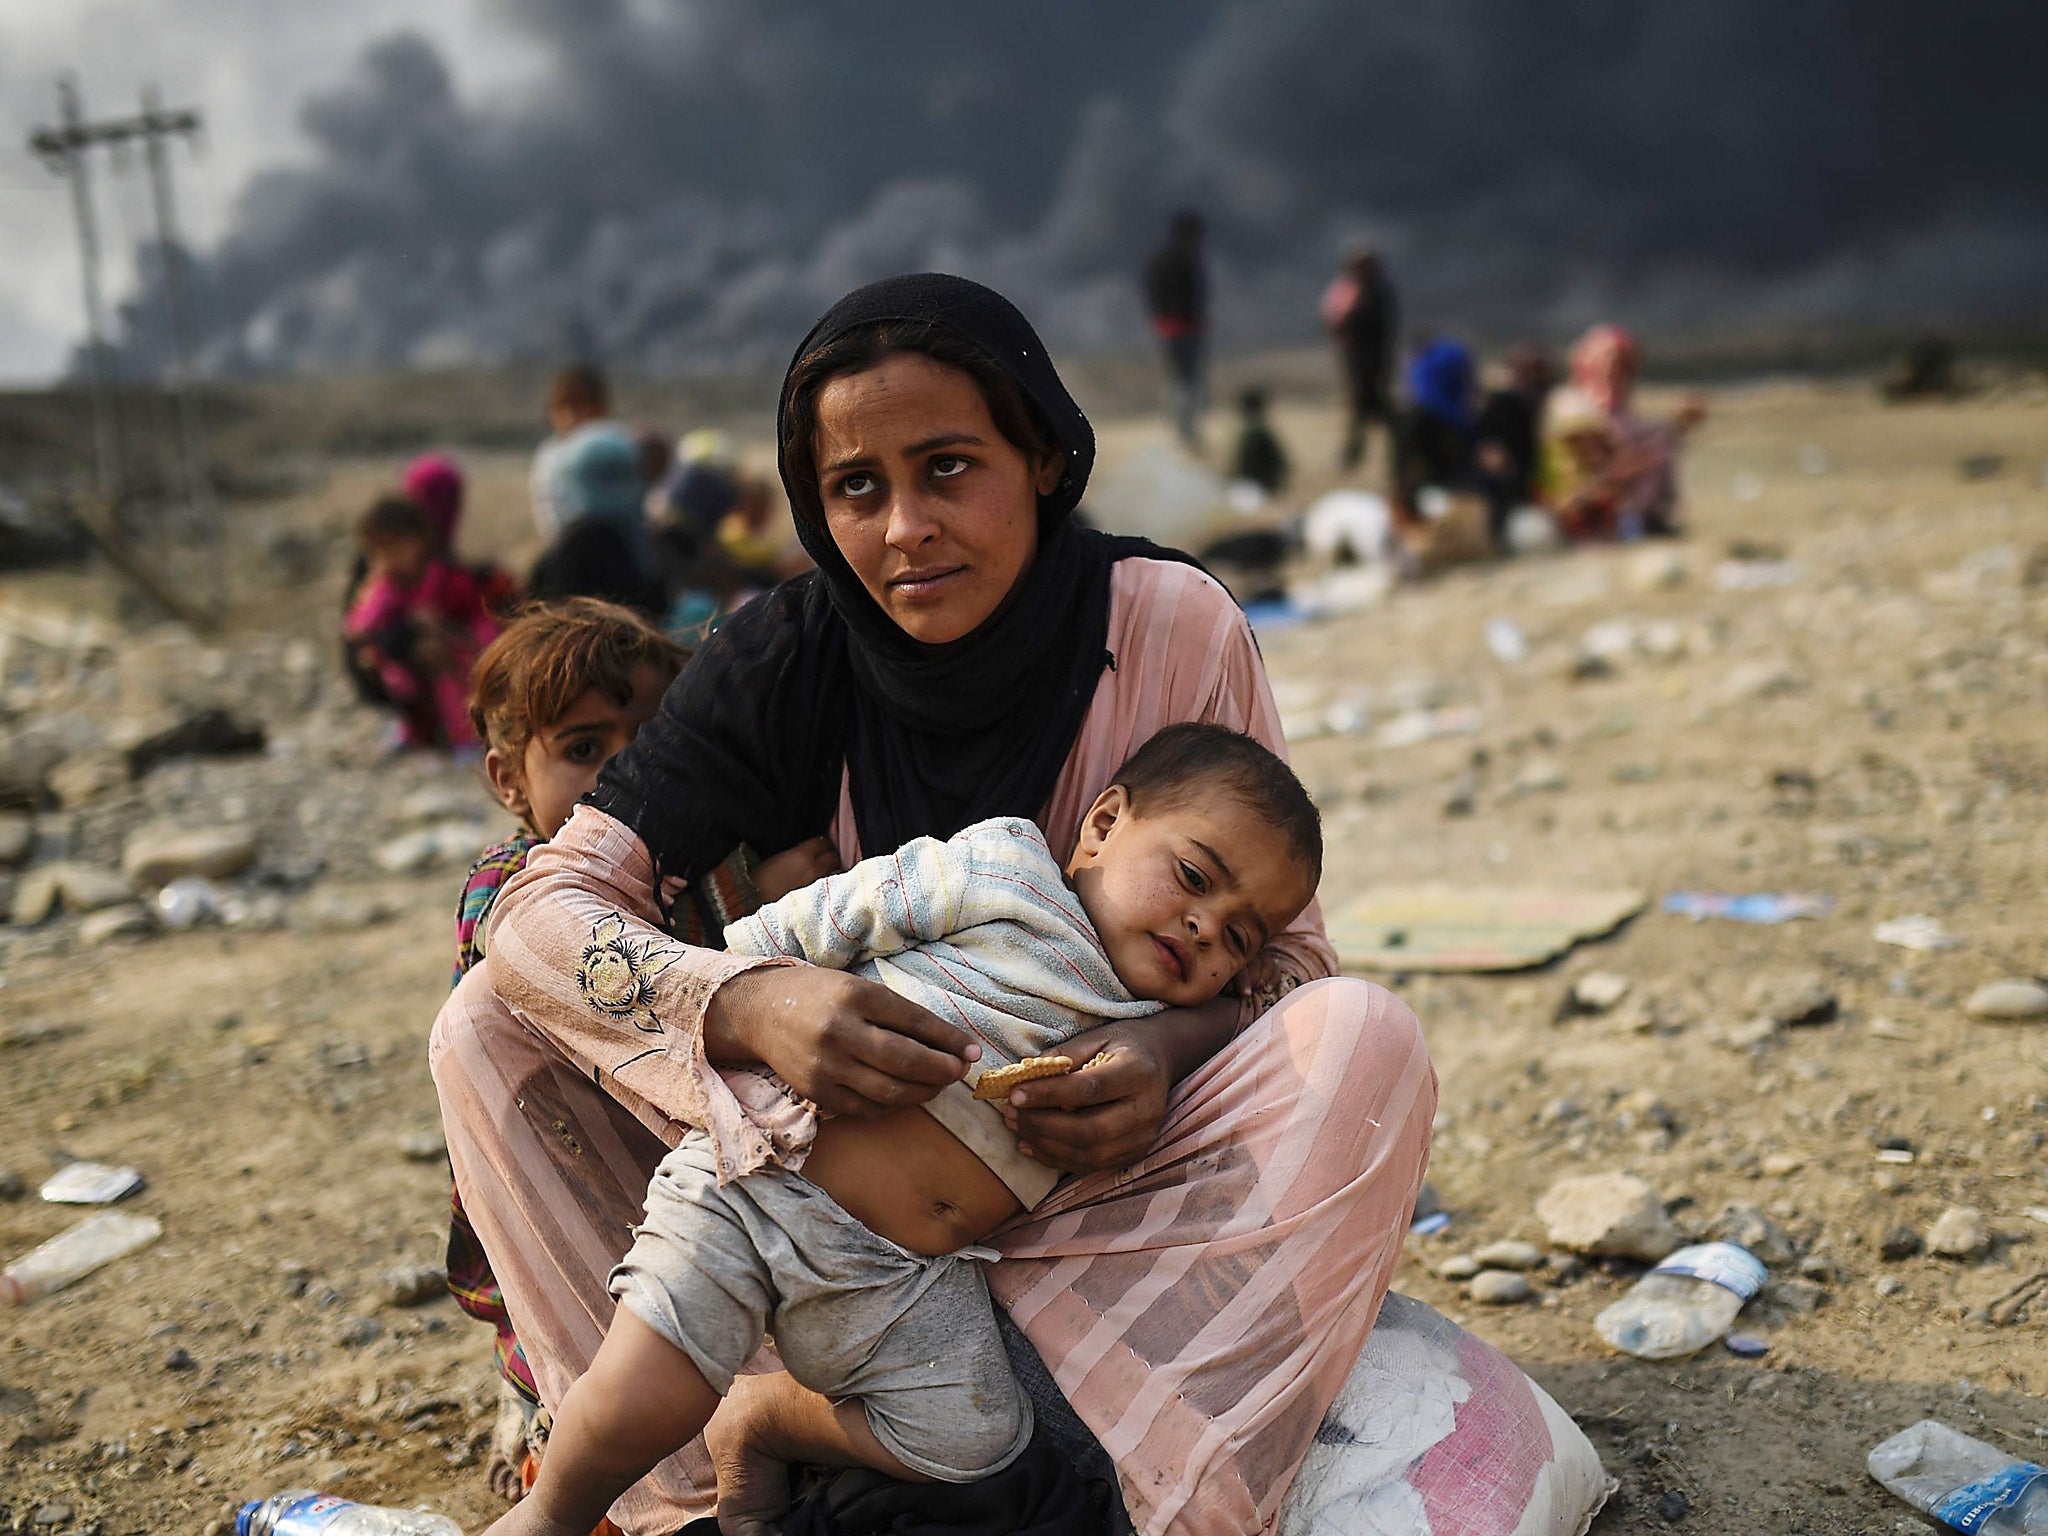 Around 7,000 people have been displaced by fighting in the first eight days of the operation to retake Mosul